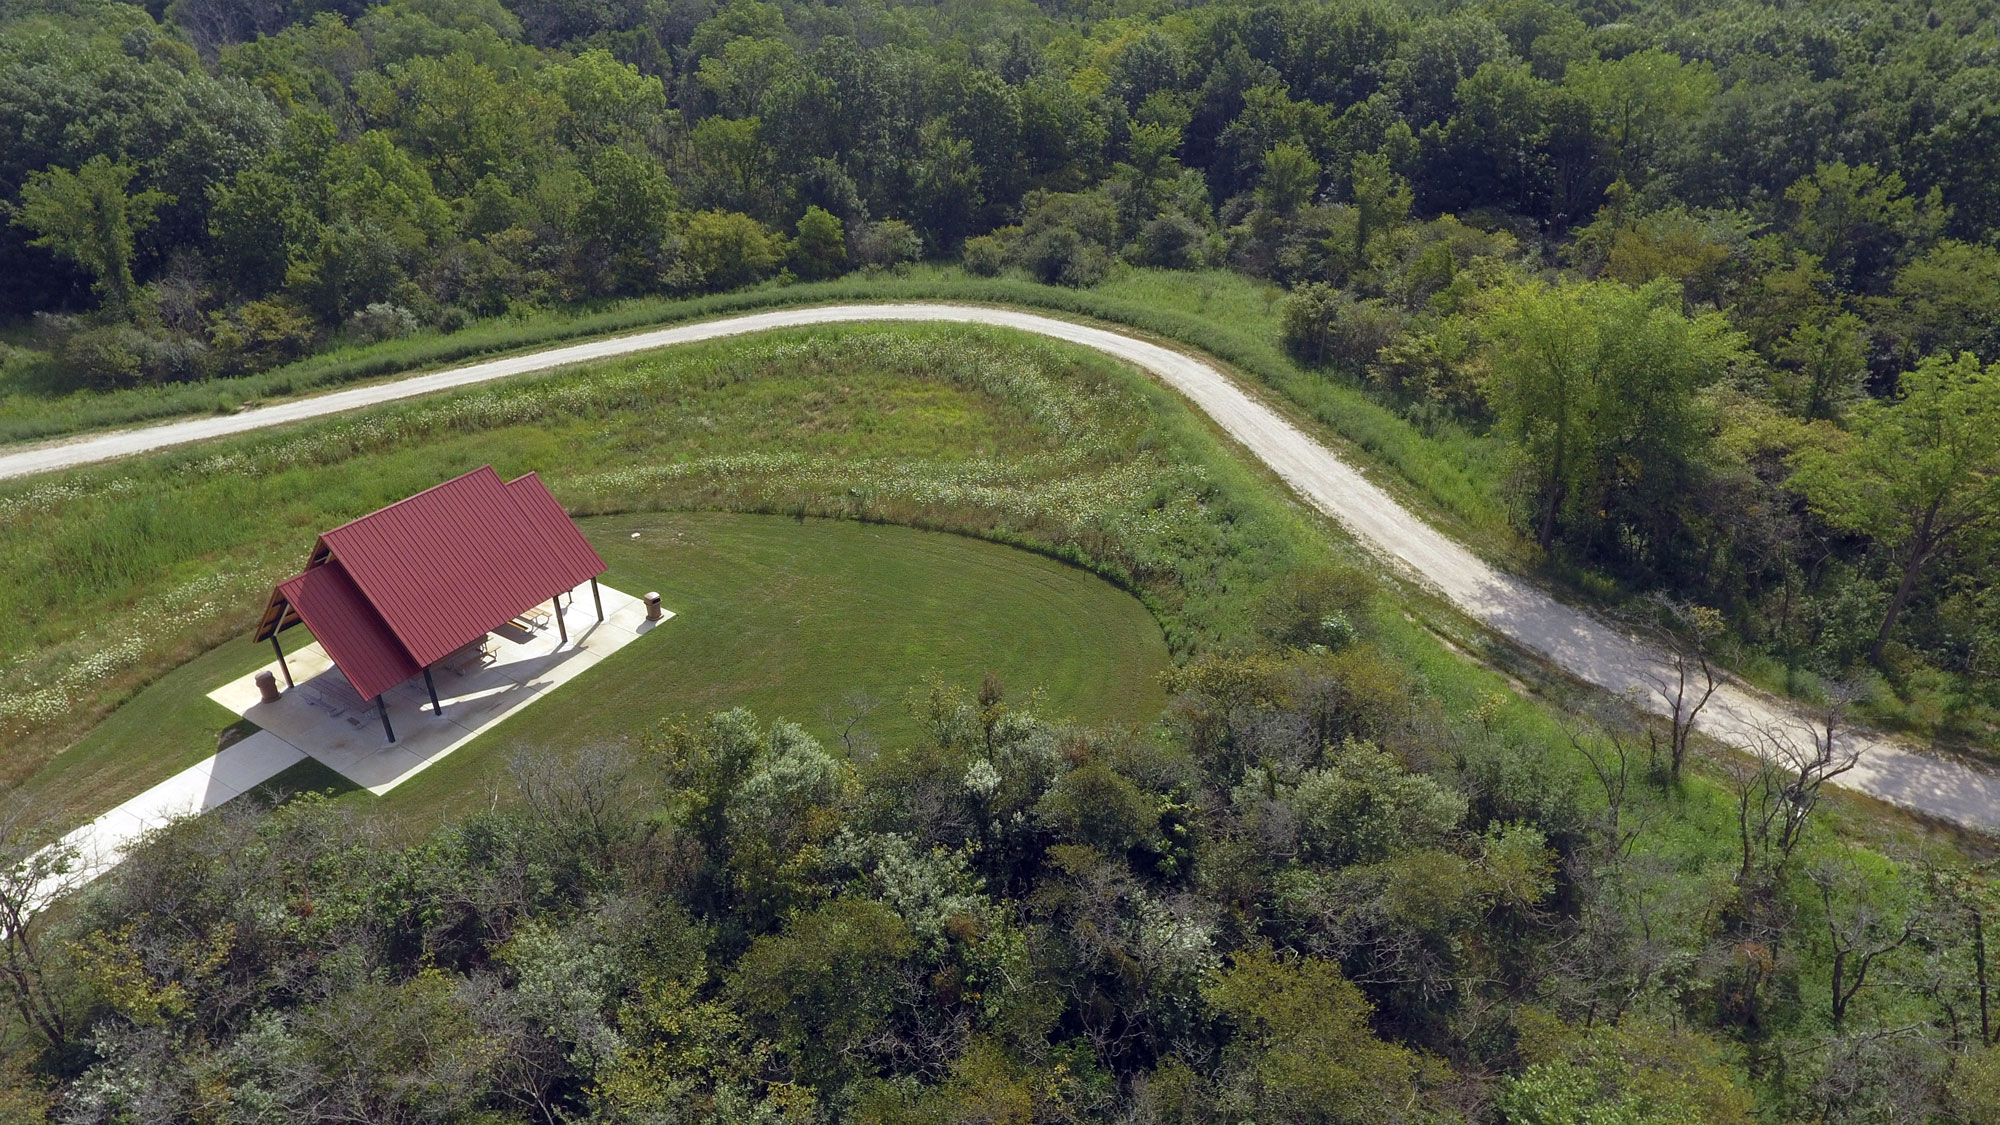 Photo for: Lasting Legacy: Forest Preserve Grows by More than 1,500 Acres